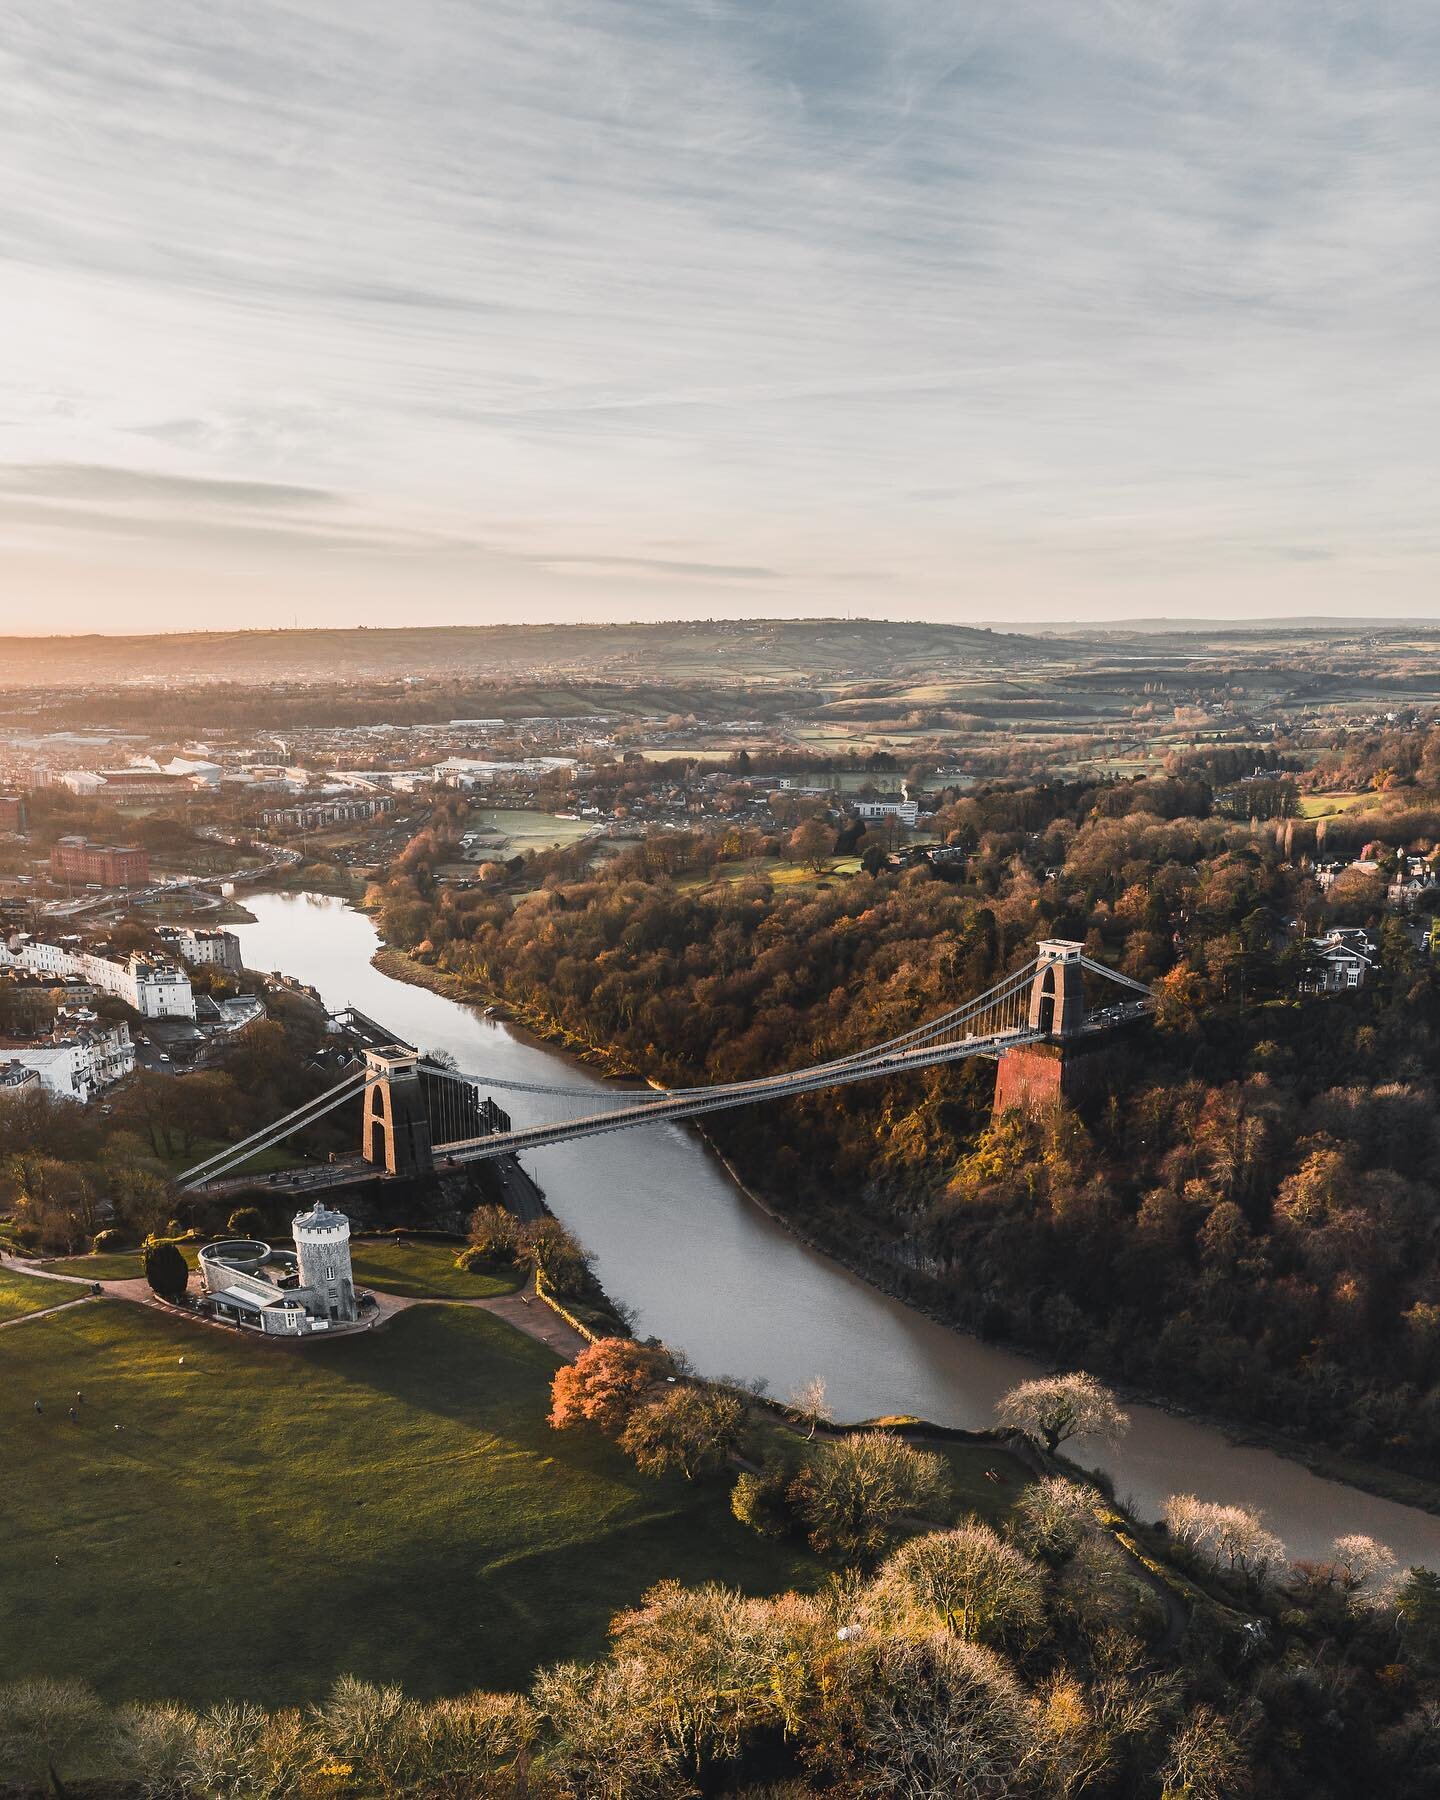 Still amazed at how many clear mornings we&rsquo;re still being gifted in December. This is one of my favourite captures of Clifton Suspension Bridge to date!. ⁣
⁣
Congratulations to @belleross, @natajack, @zacflywalker, and @rosieeer who all won som